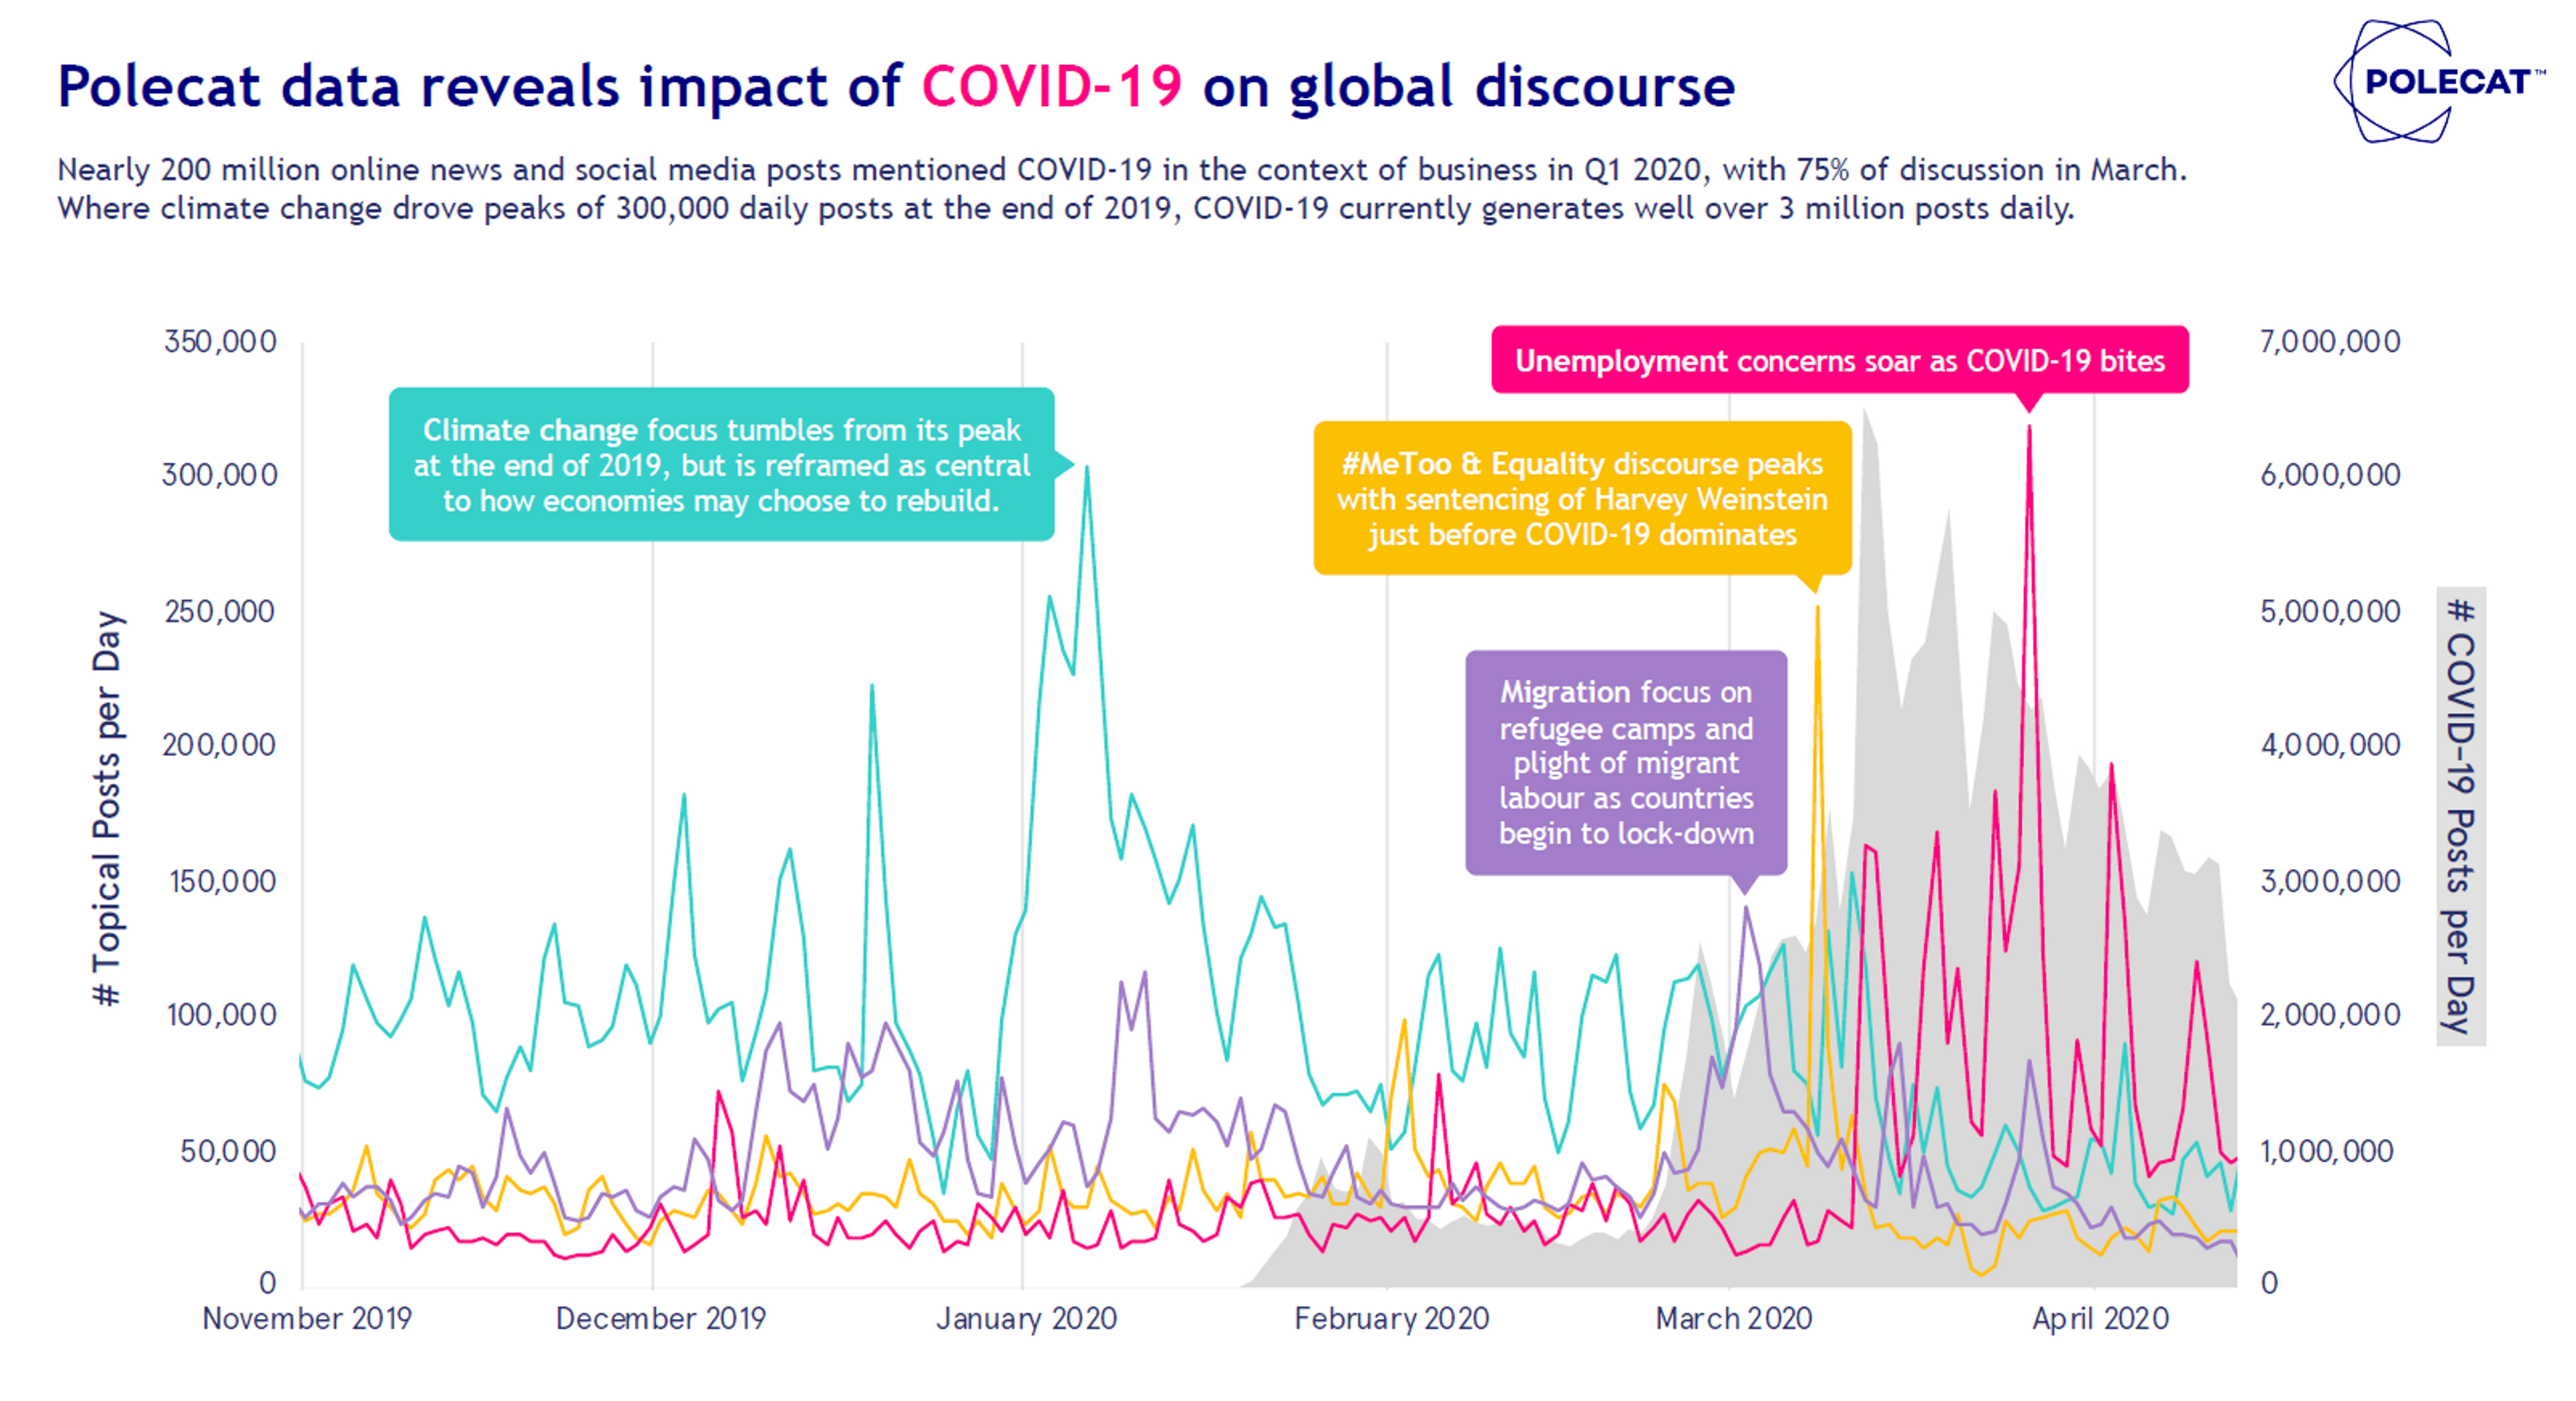 A chart displaying the impact of COVID-19 on global discourse